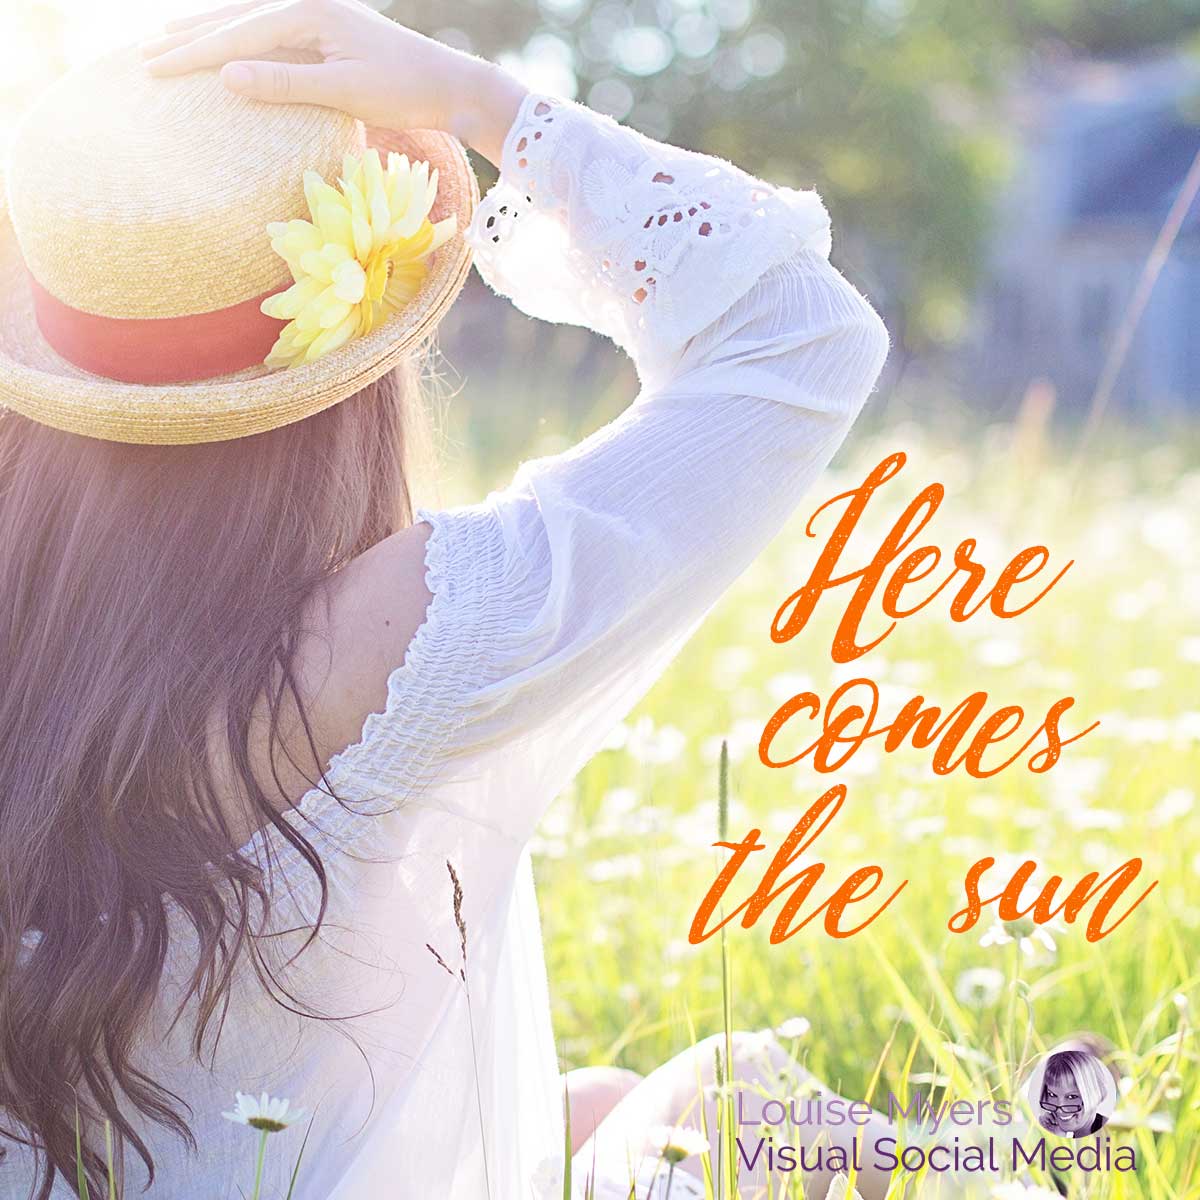 woman in straw hat sits in sunny field of flowers with quote saying Here comes the sun.